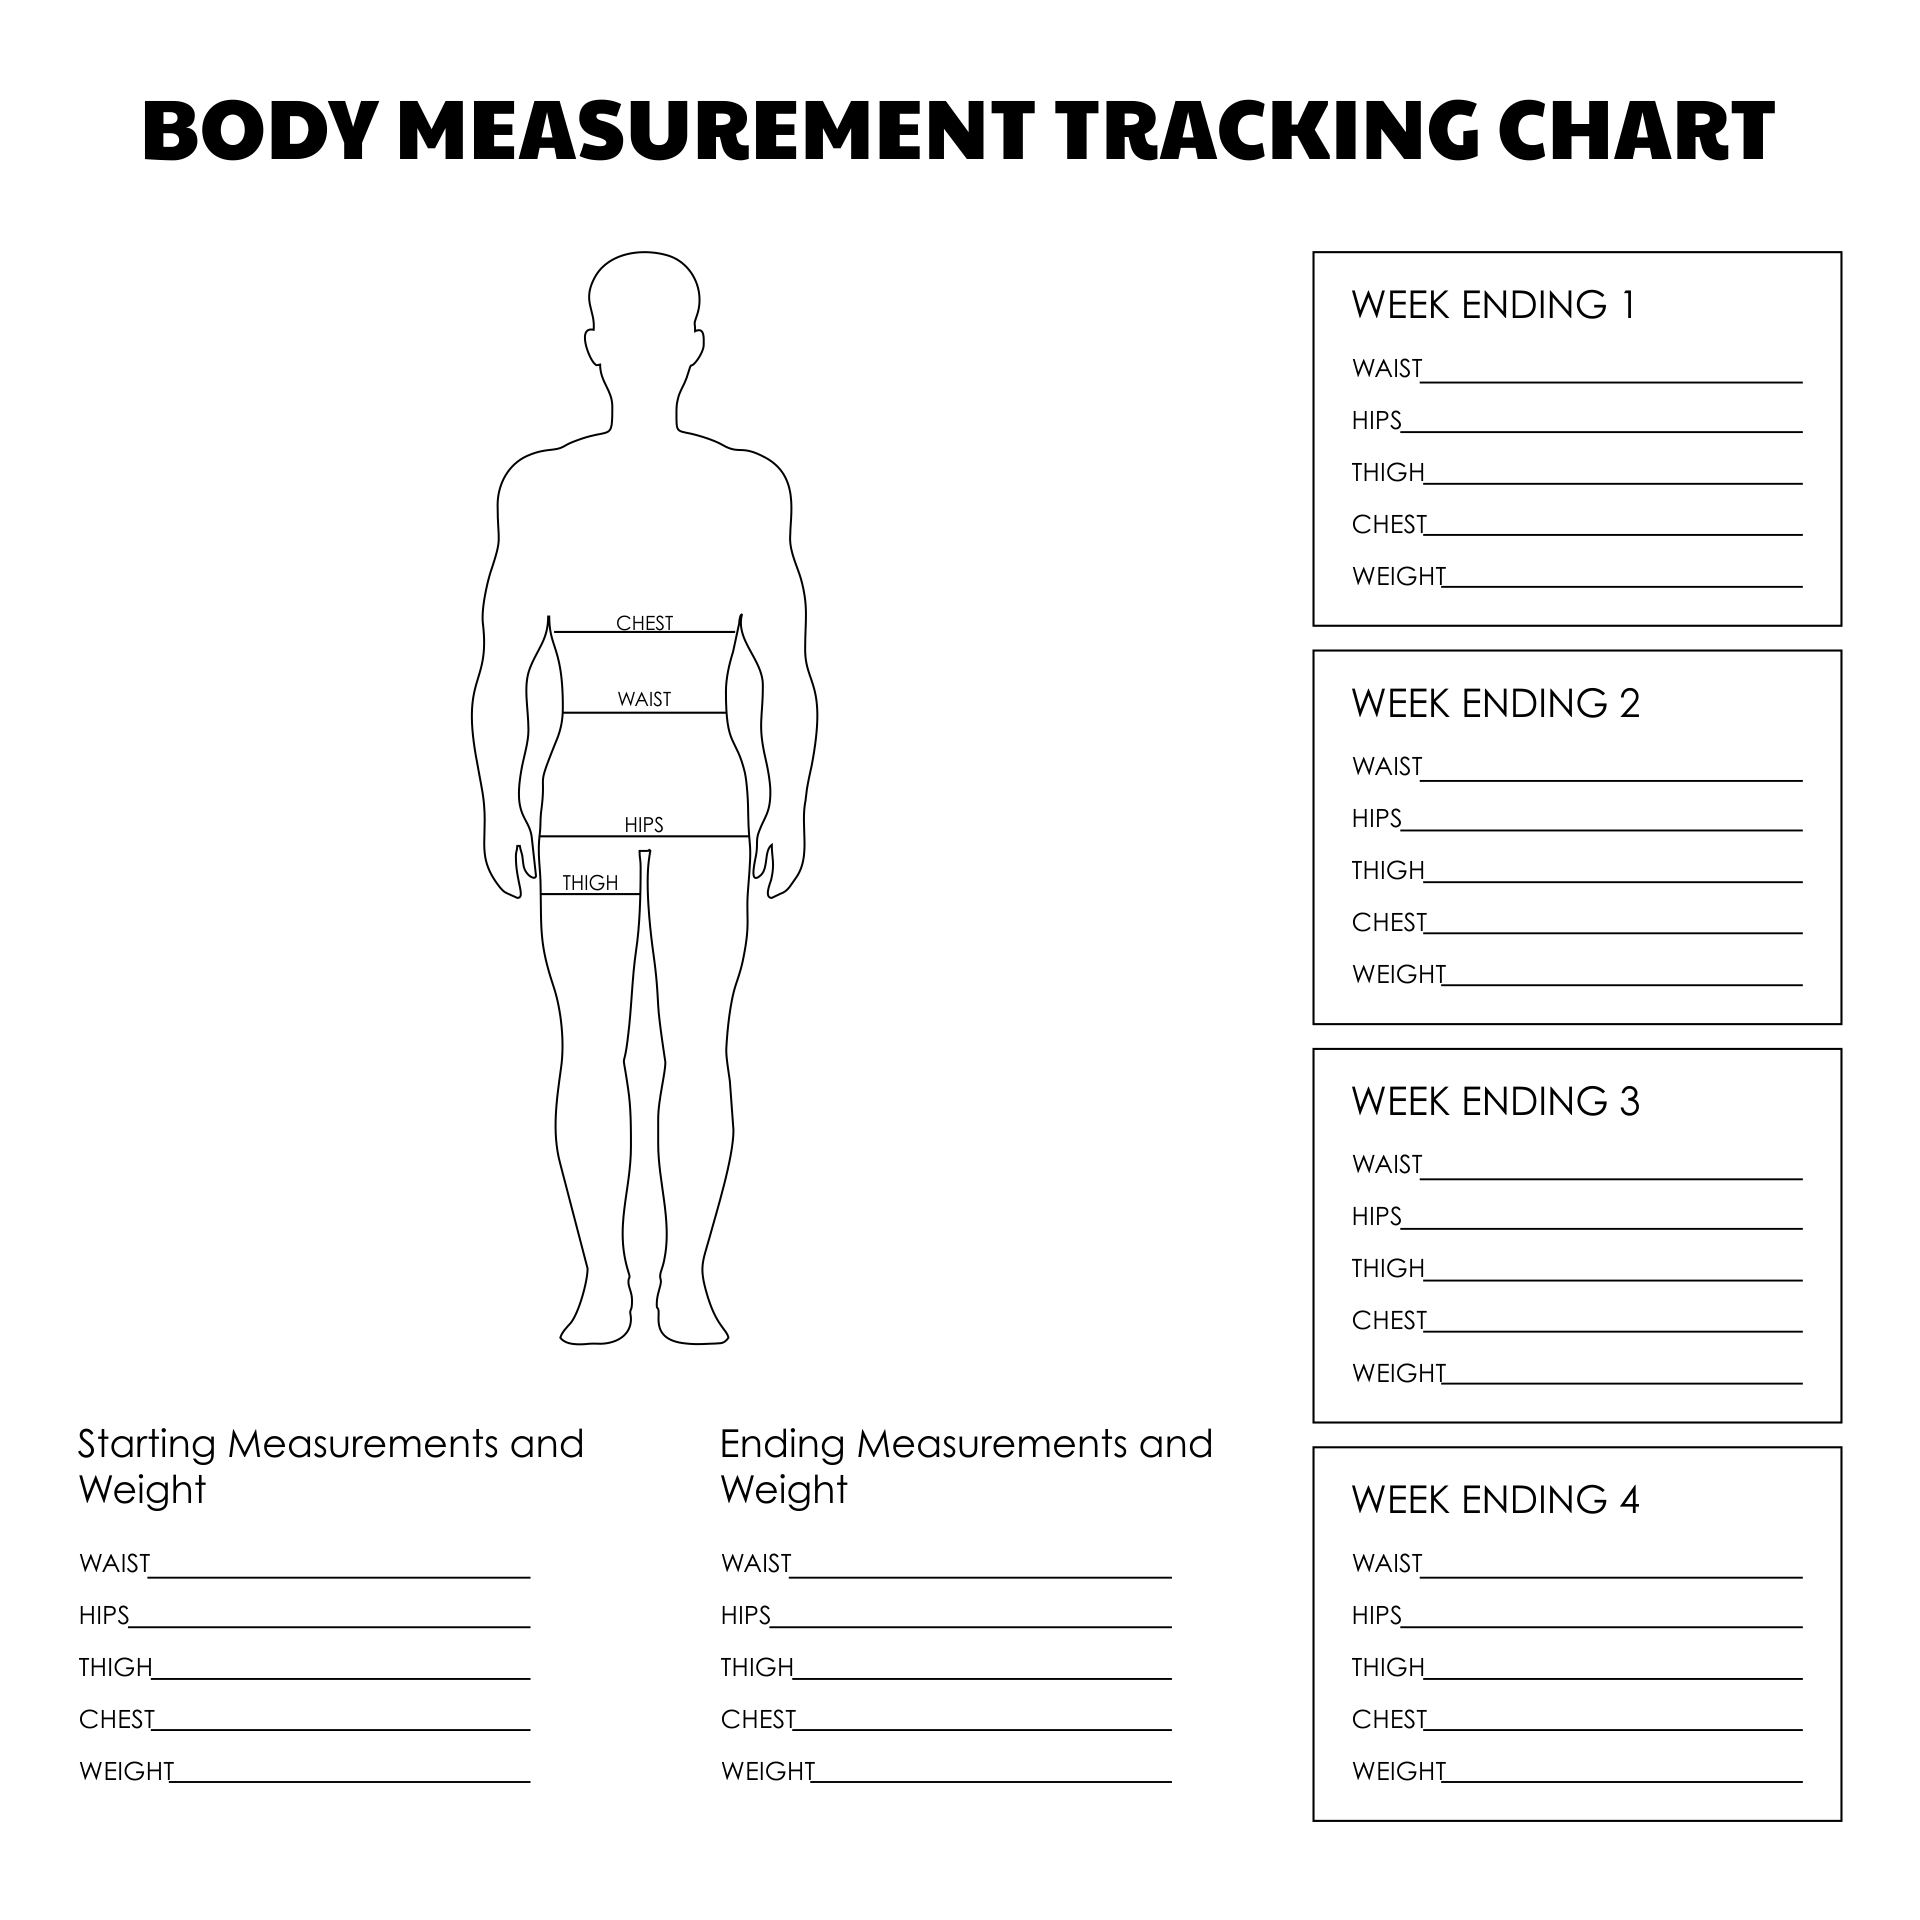 7 Best Images of Printable Weight Loss Measurement Chart - Printable ...